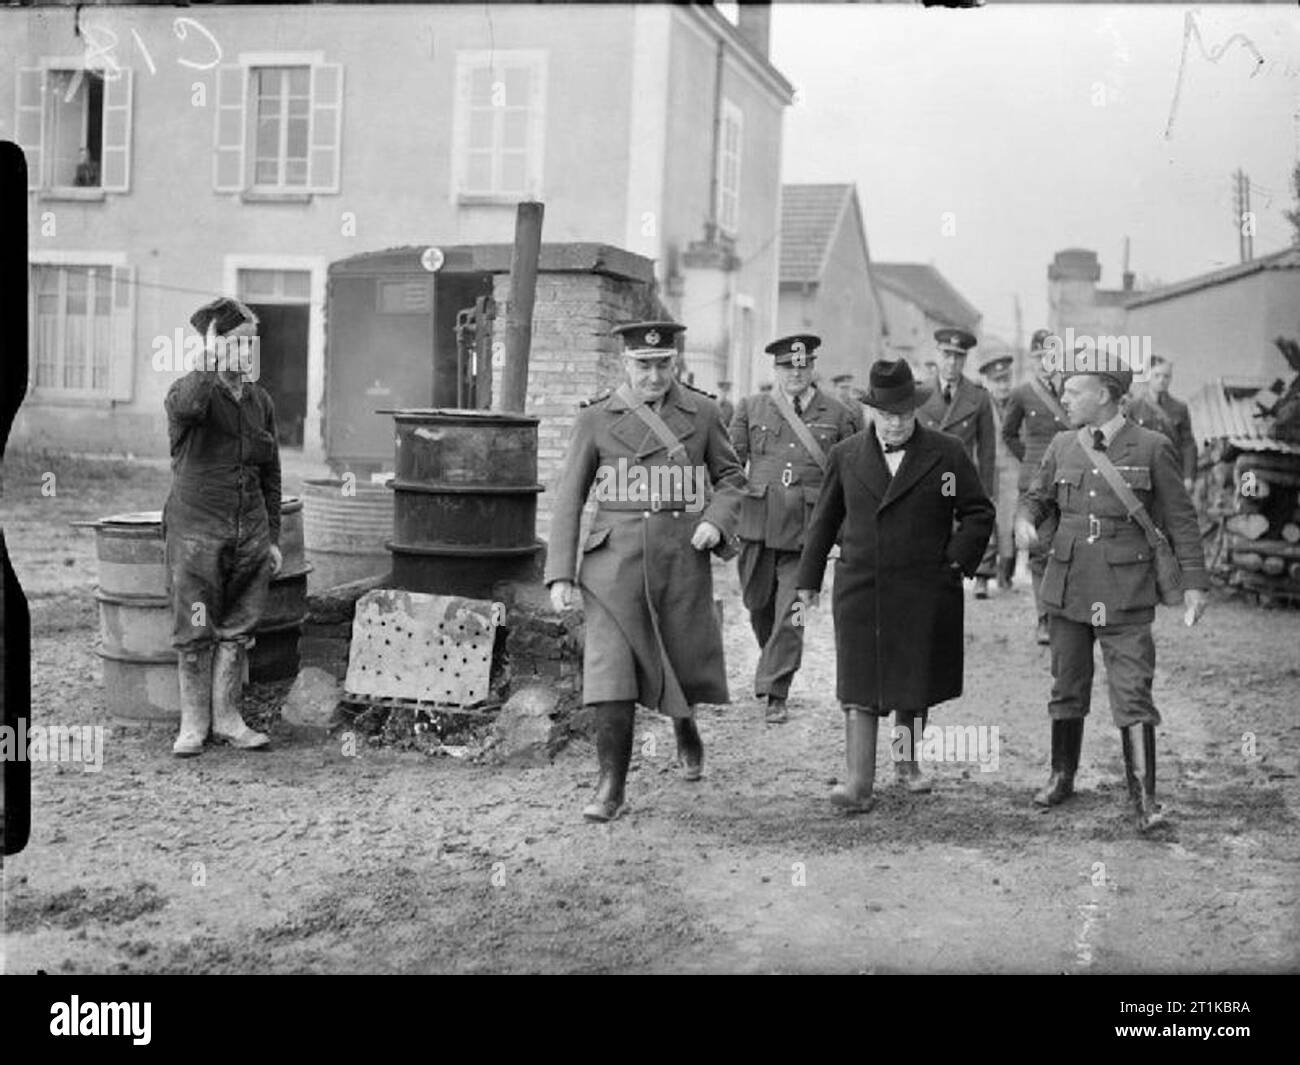 Royal Air Force- France 1939-1940. Sir Kingsley Wood, Secretary of State for Air, accompanied by Air Vice-Marshal P H L Playfair, Air Officer Commanding the Advanced Air Striking Force (left) , passes the boiler and bath quarters of an RAF unit billetted in France. Stock Photo